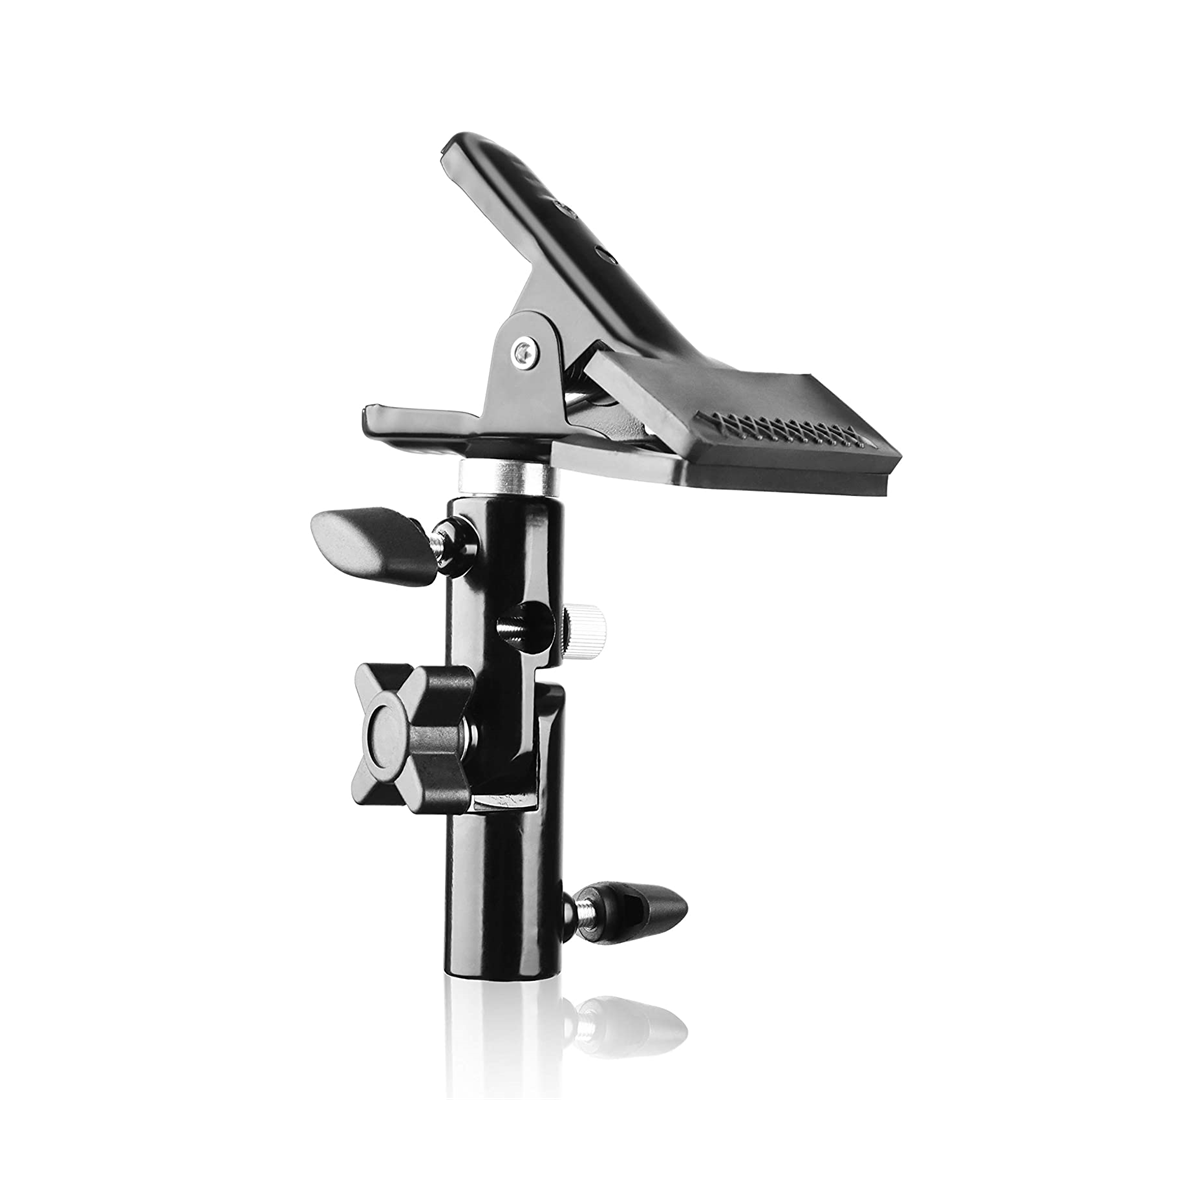 Heavy Duty Metal Reflector Holder for Light Stand